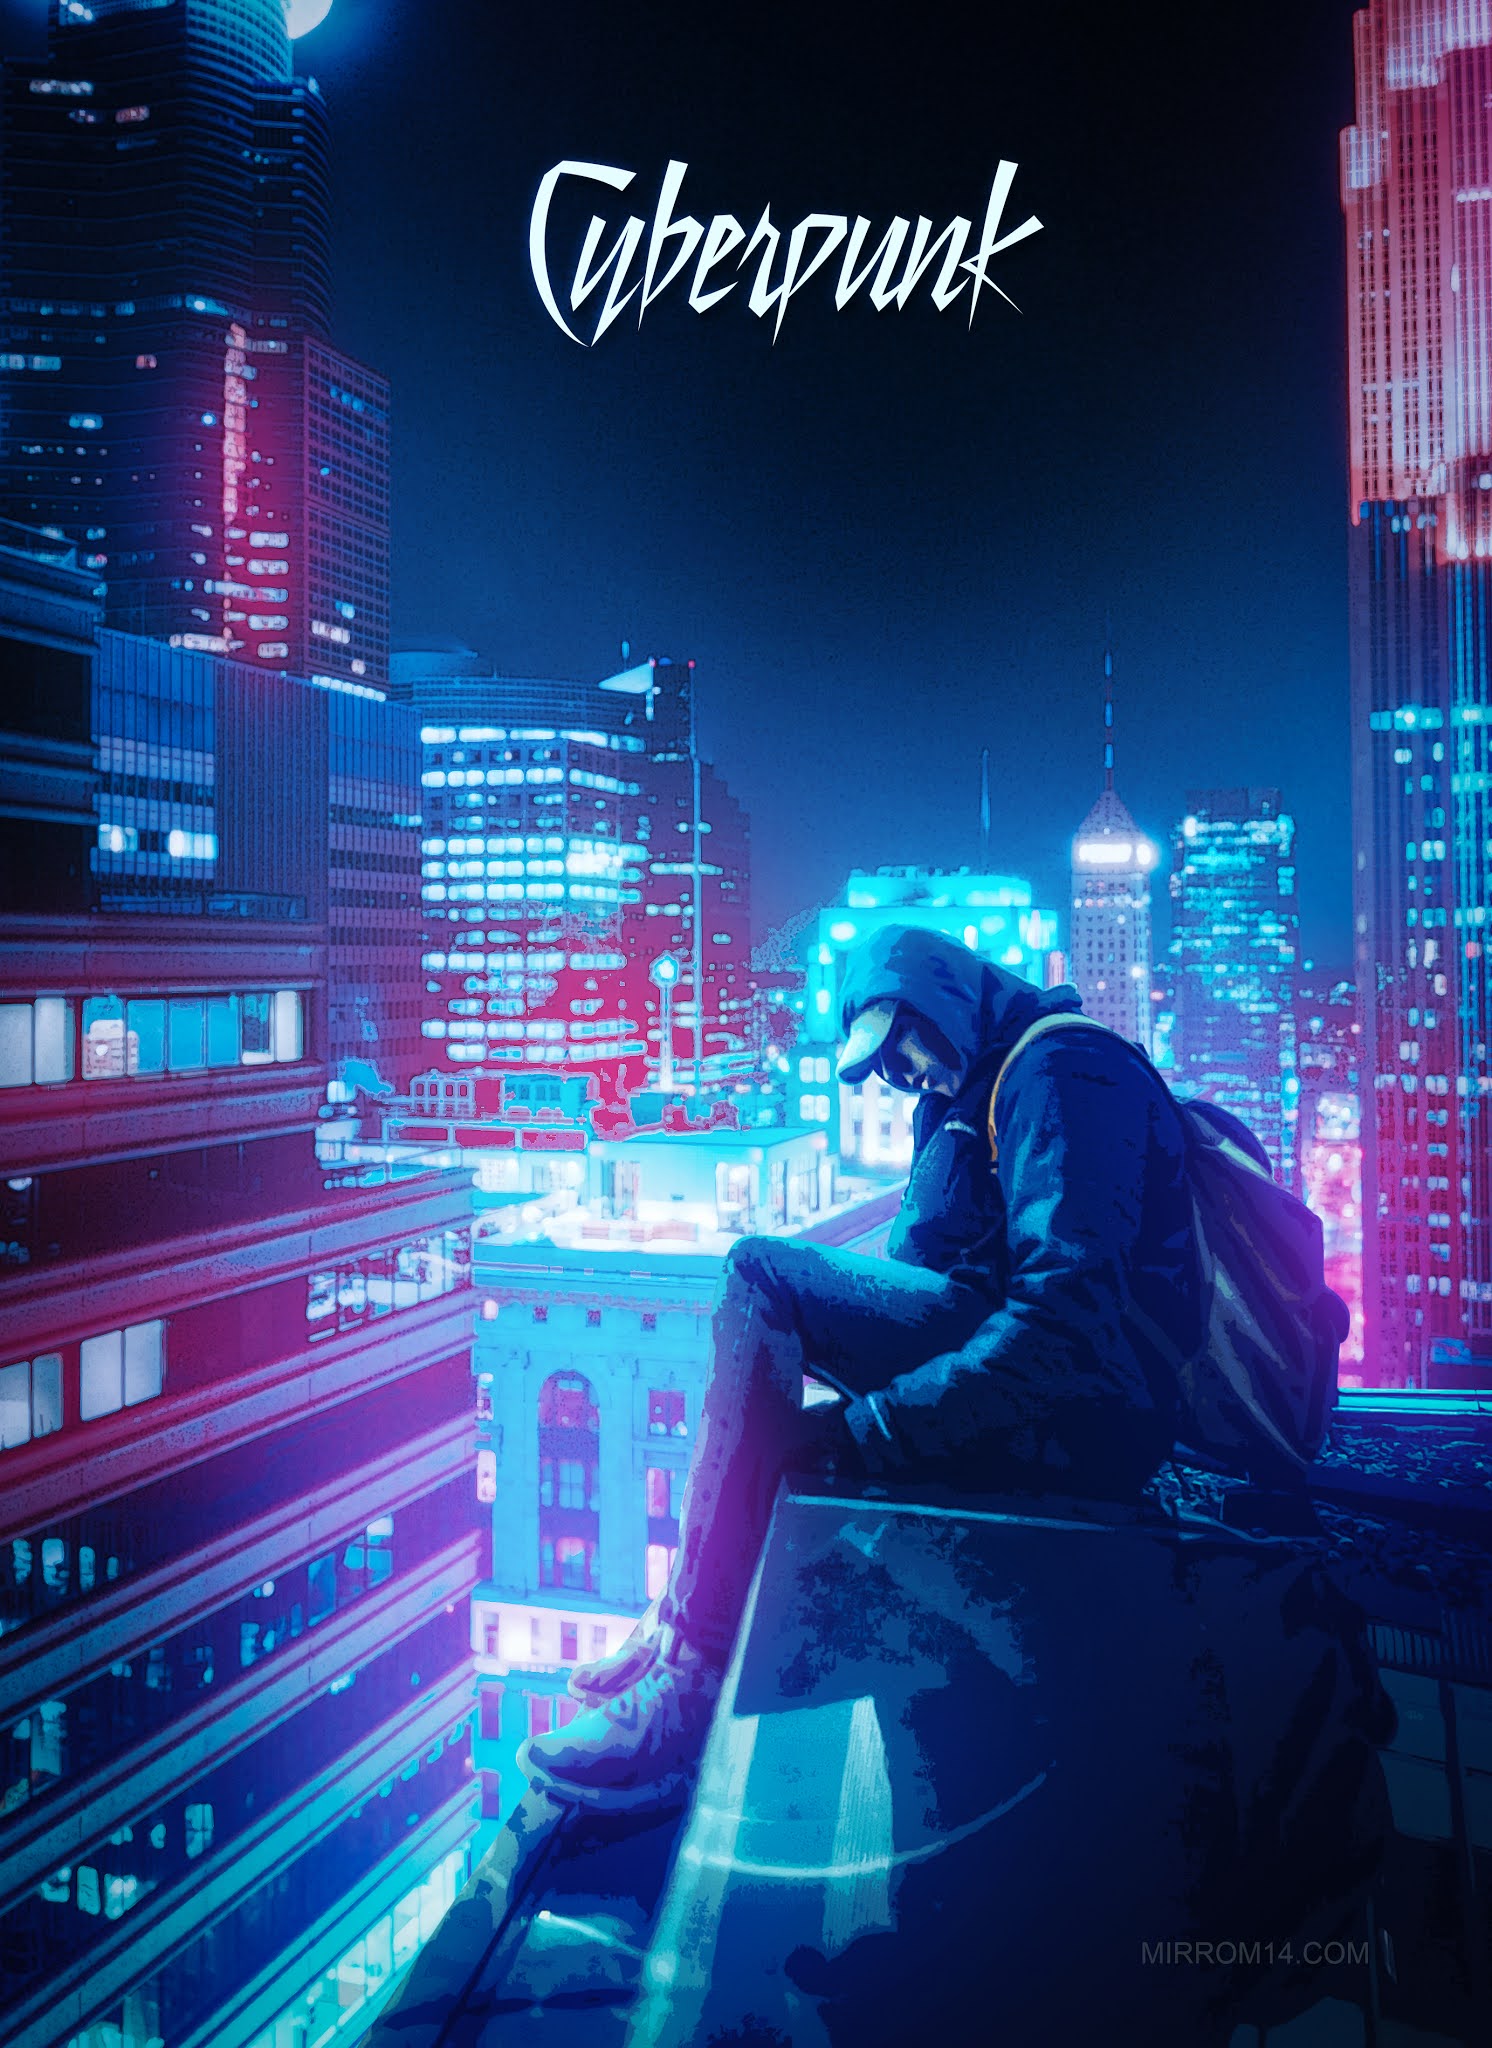 Create an Anime Effect With Cyberpunk Color in Photoshop